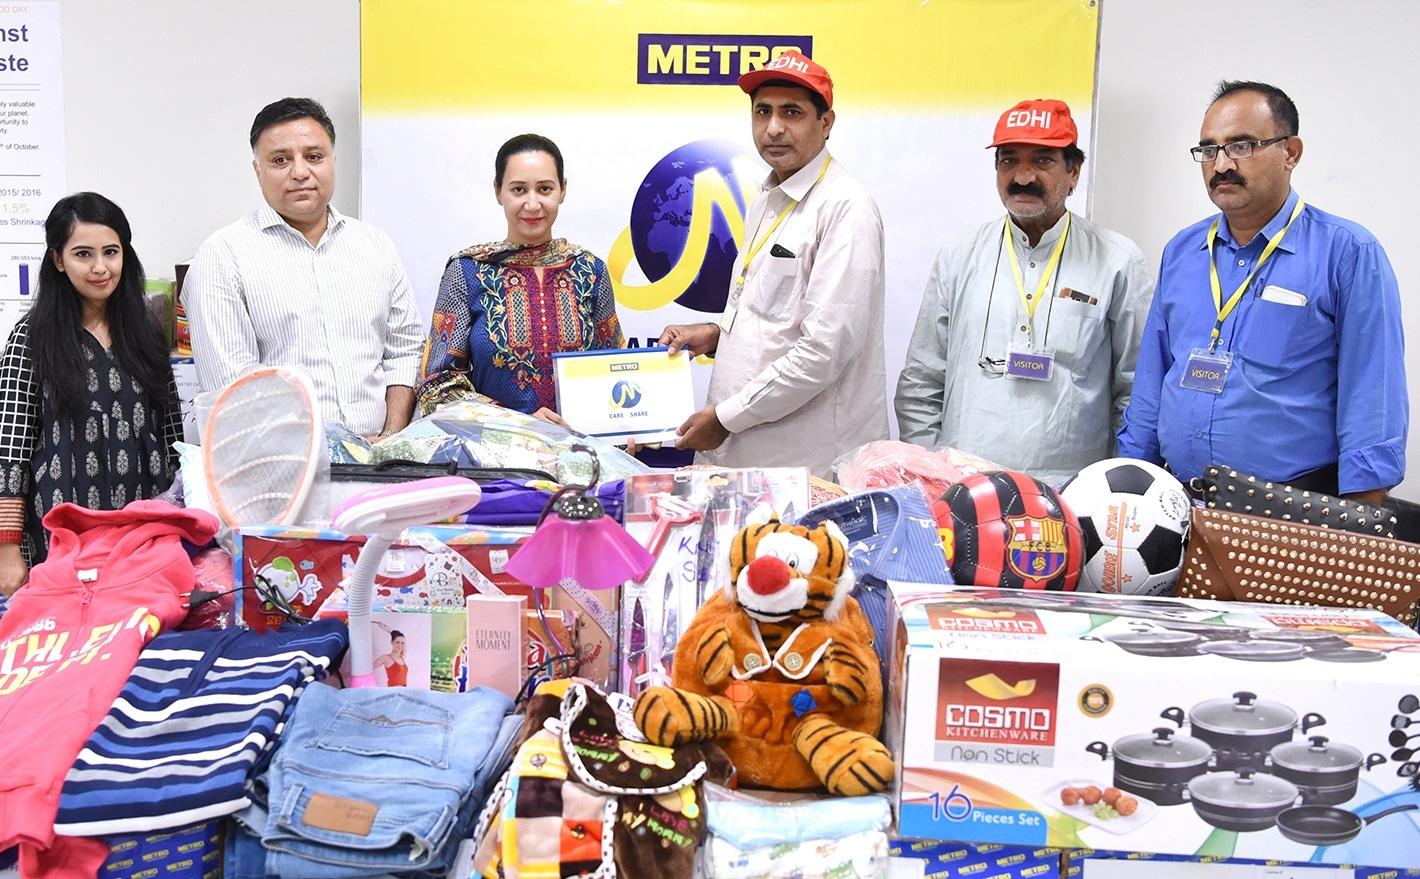 METRO Cash & Carry Pakistan Donates to EDHI Foundation on UN’s International Day of Charity